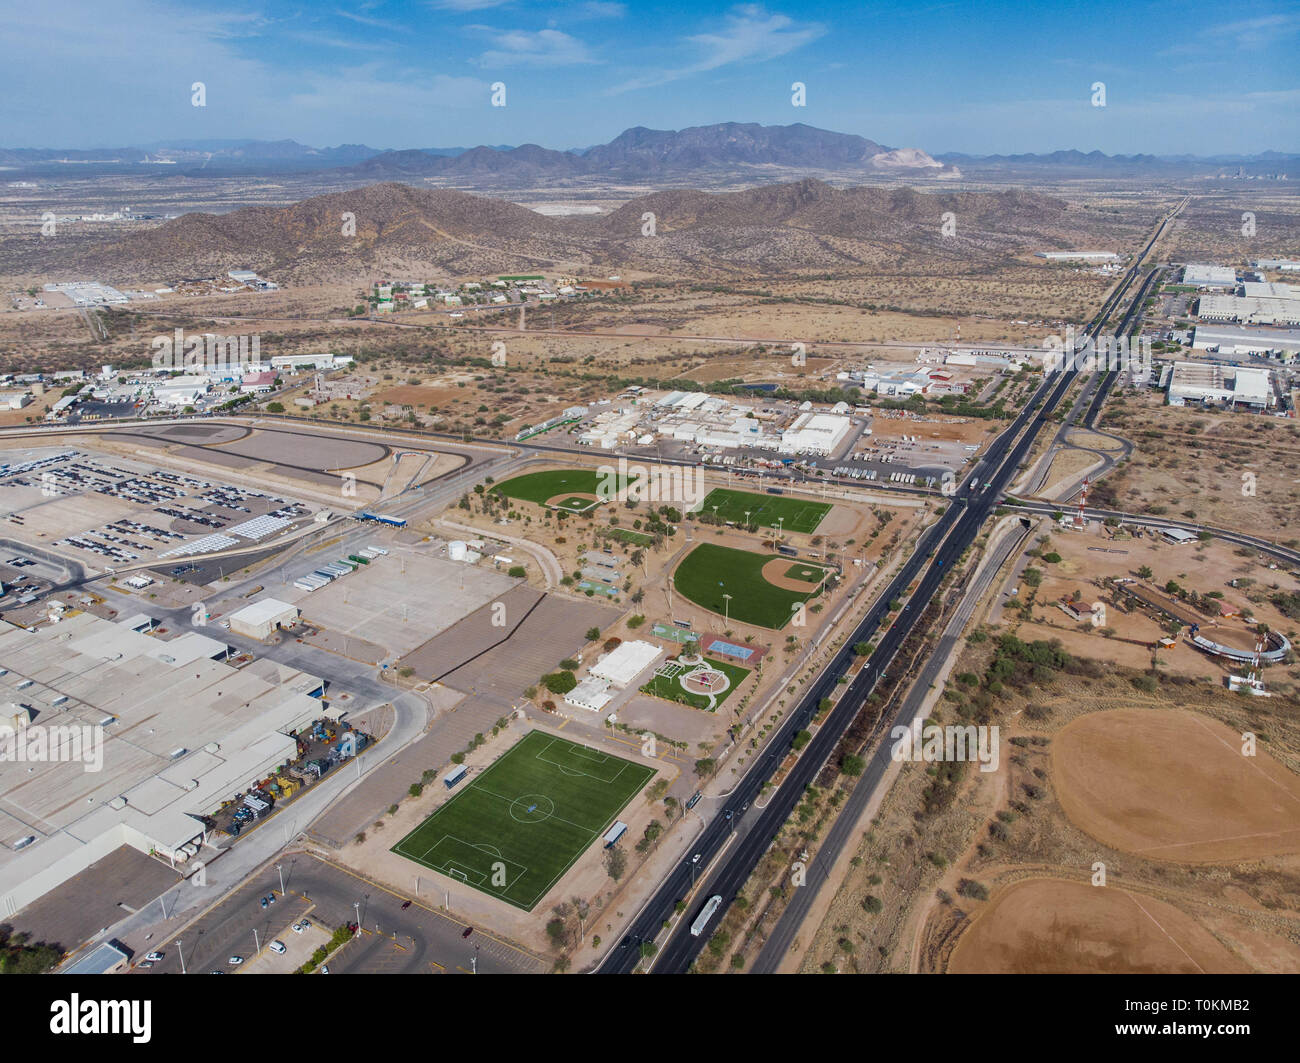 Aerial view of the Ford Motor Company automotive company in the Hermosillo industrial park. Automotive industry.  Hermosillo Stamping and Assembly is an automobile assembly plant of Ford Motor Company located in Hermosillo, Sonora, Mexico. The plant currently assembles the Ford Fusion and Lincoln MKZ, Lincoln models for the North American market. Ford is an American multinational automaker  .  Photo: (NortePhoto / LuisGutierrez)  ...  keywords: dji, aerial, djimavic, mavicair, aerial photo, aerial photography, urban landscape, aerial photography, aerial photo, urban, urban, urban, plane, archi Stock Photo